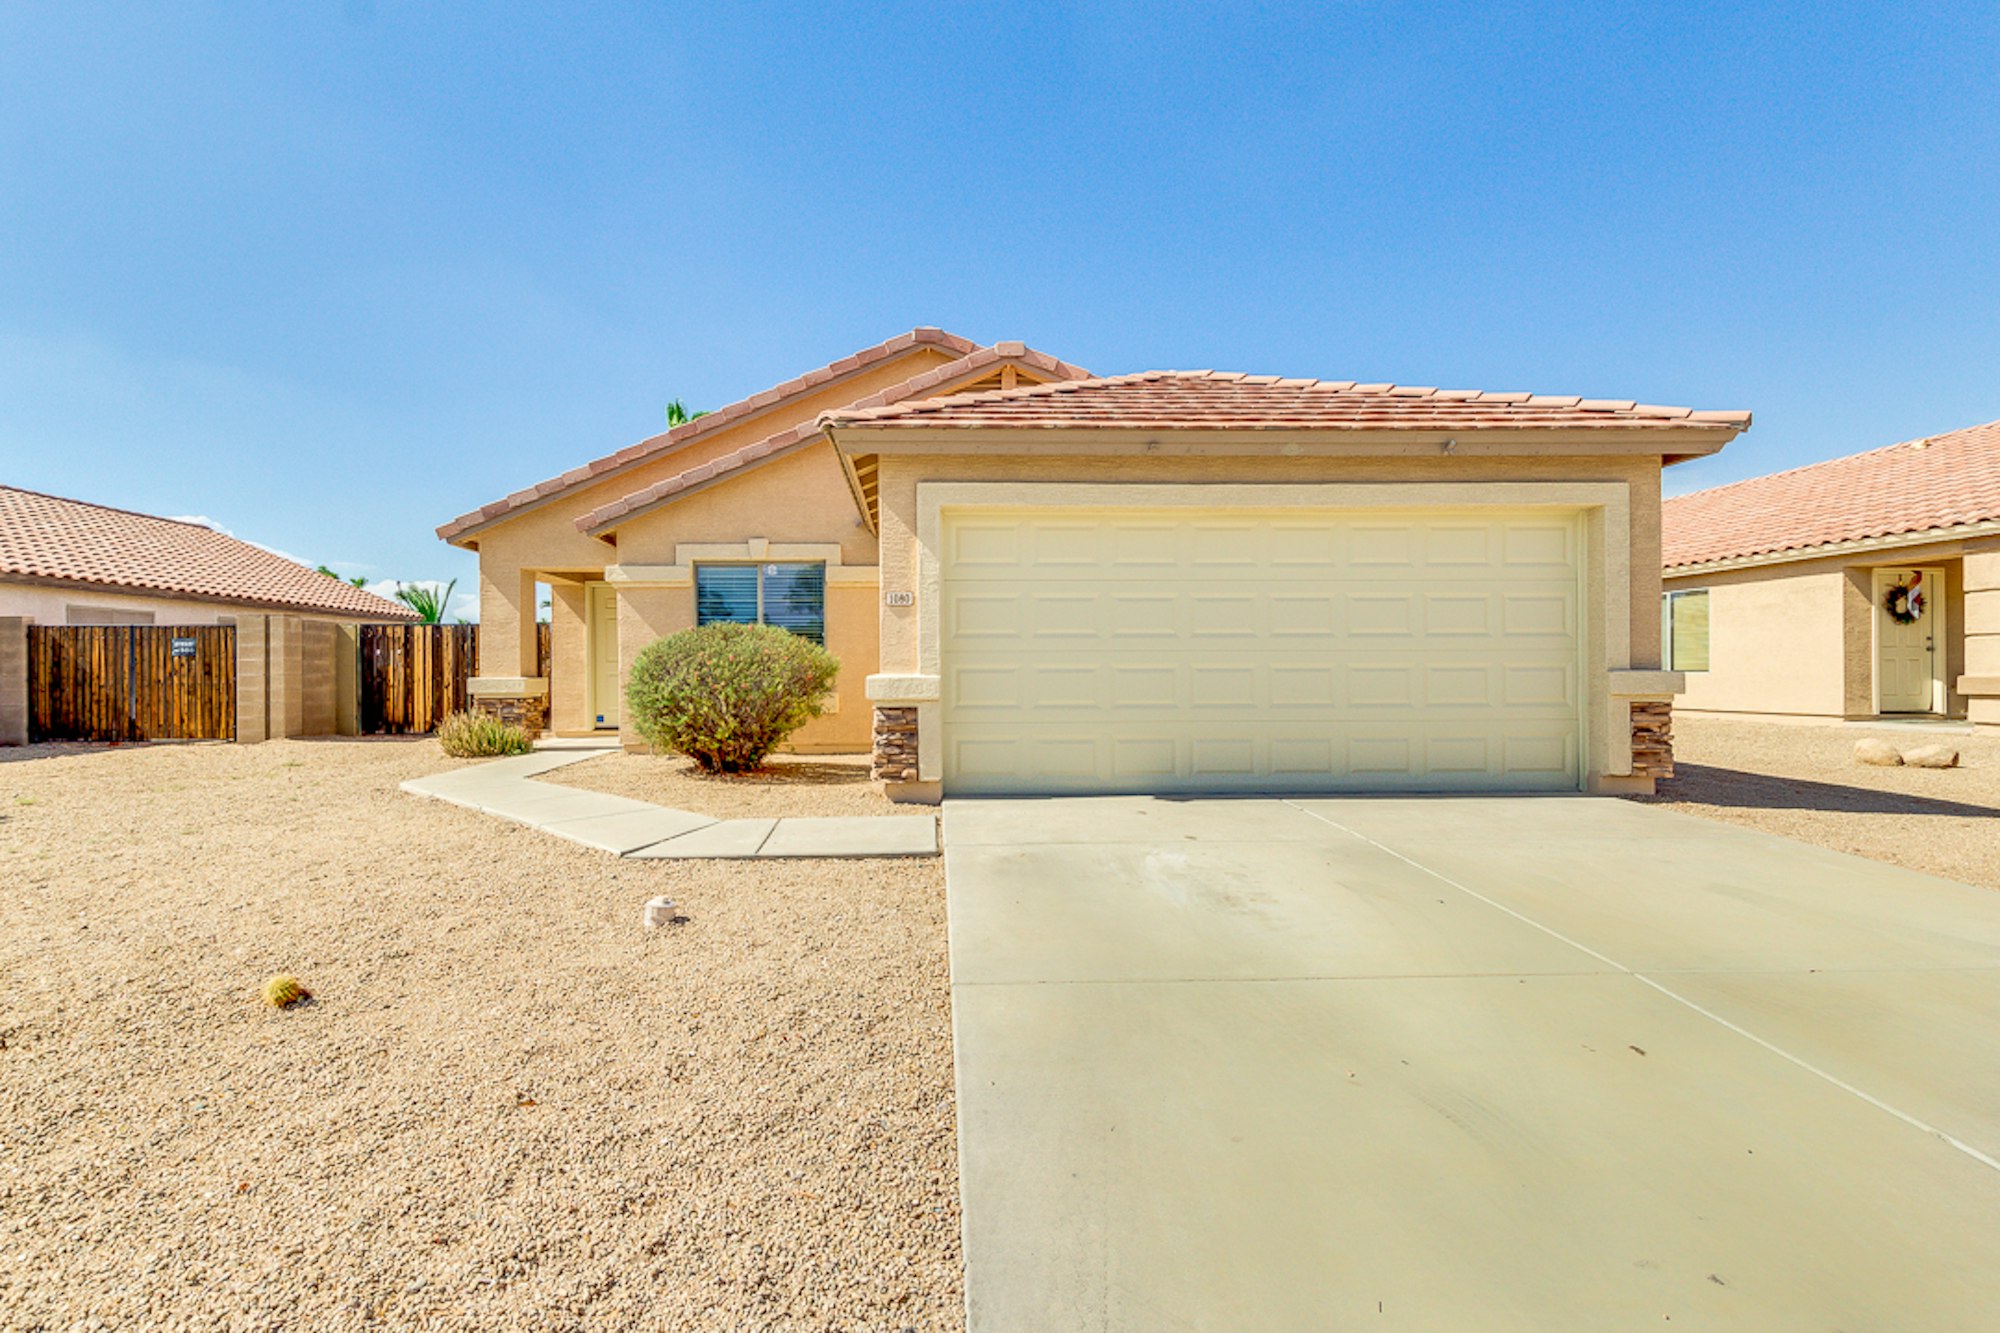 Photo 1 of 24 - 1080 W 11th Ave, Apache Junction, AZ 85120